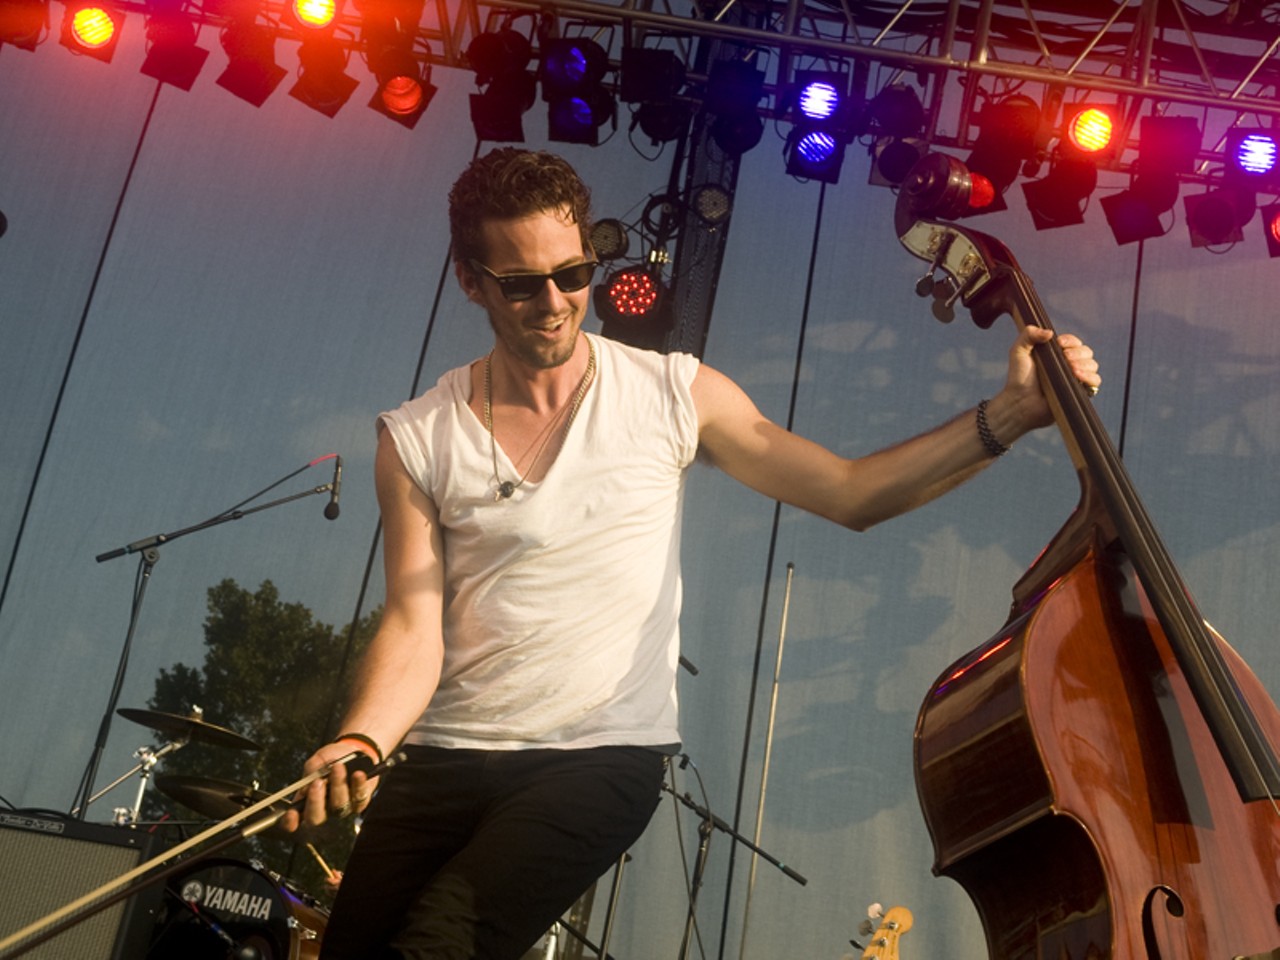 Airborne Toxic Event performing at the LouFest.